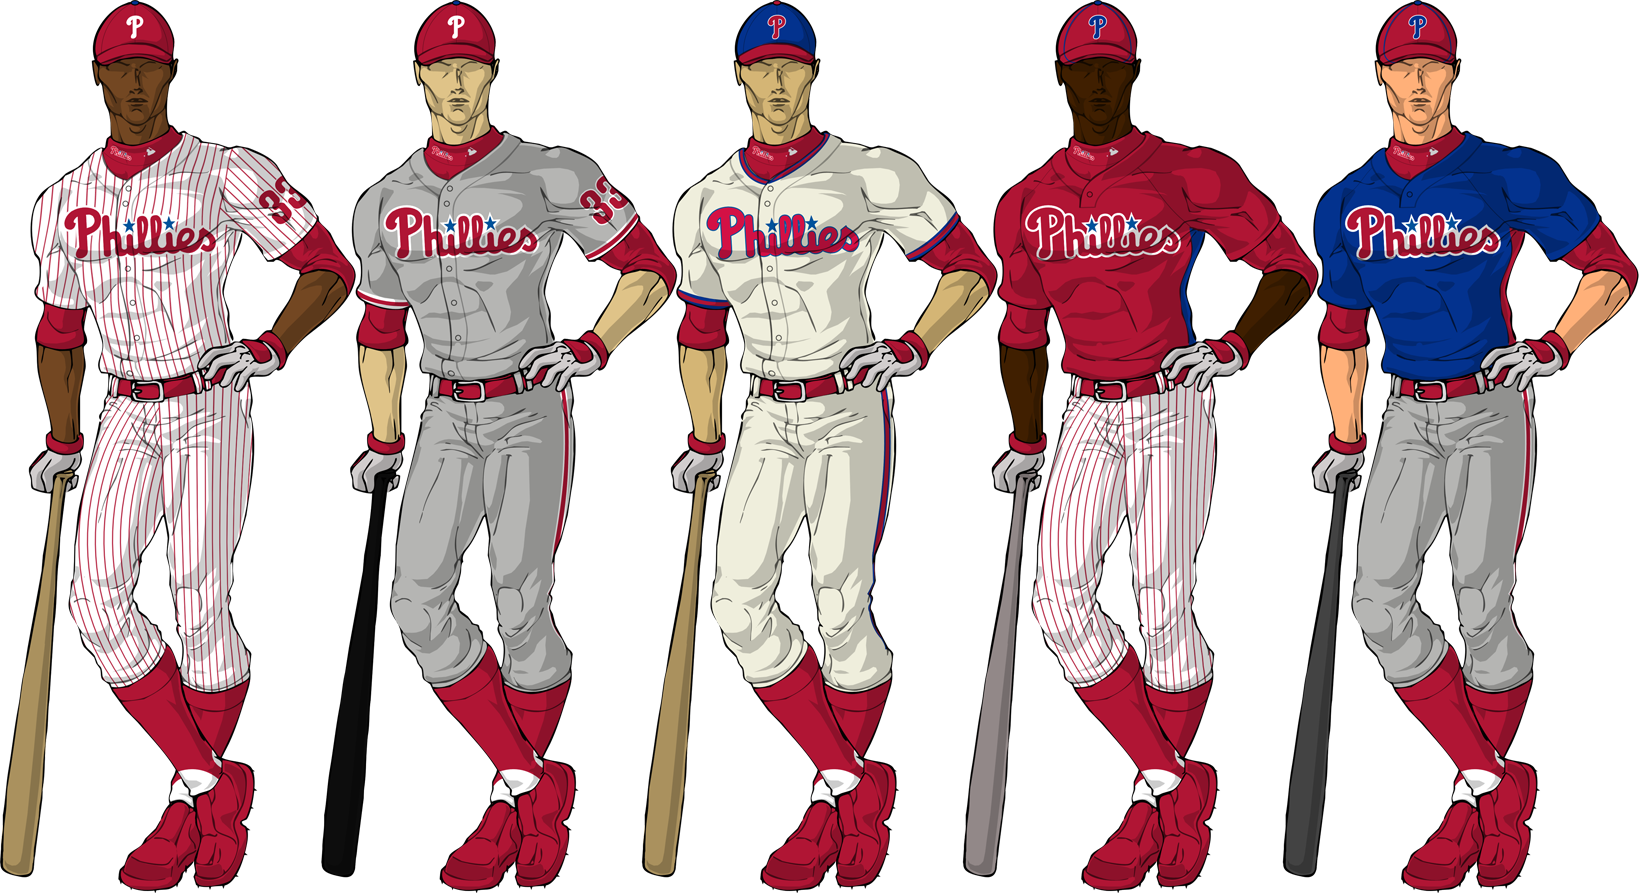 Phillies_2010.png